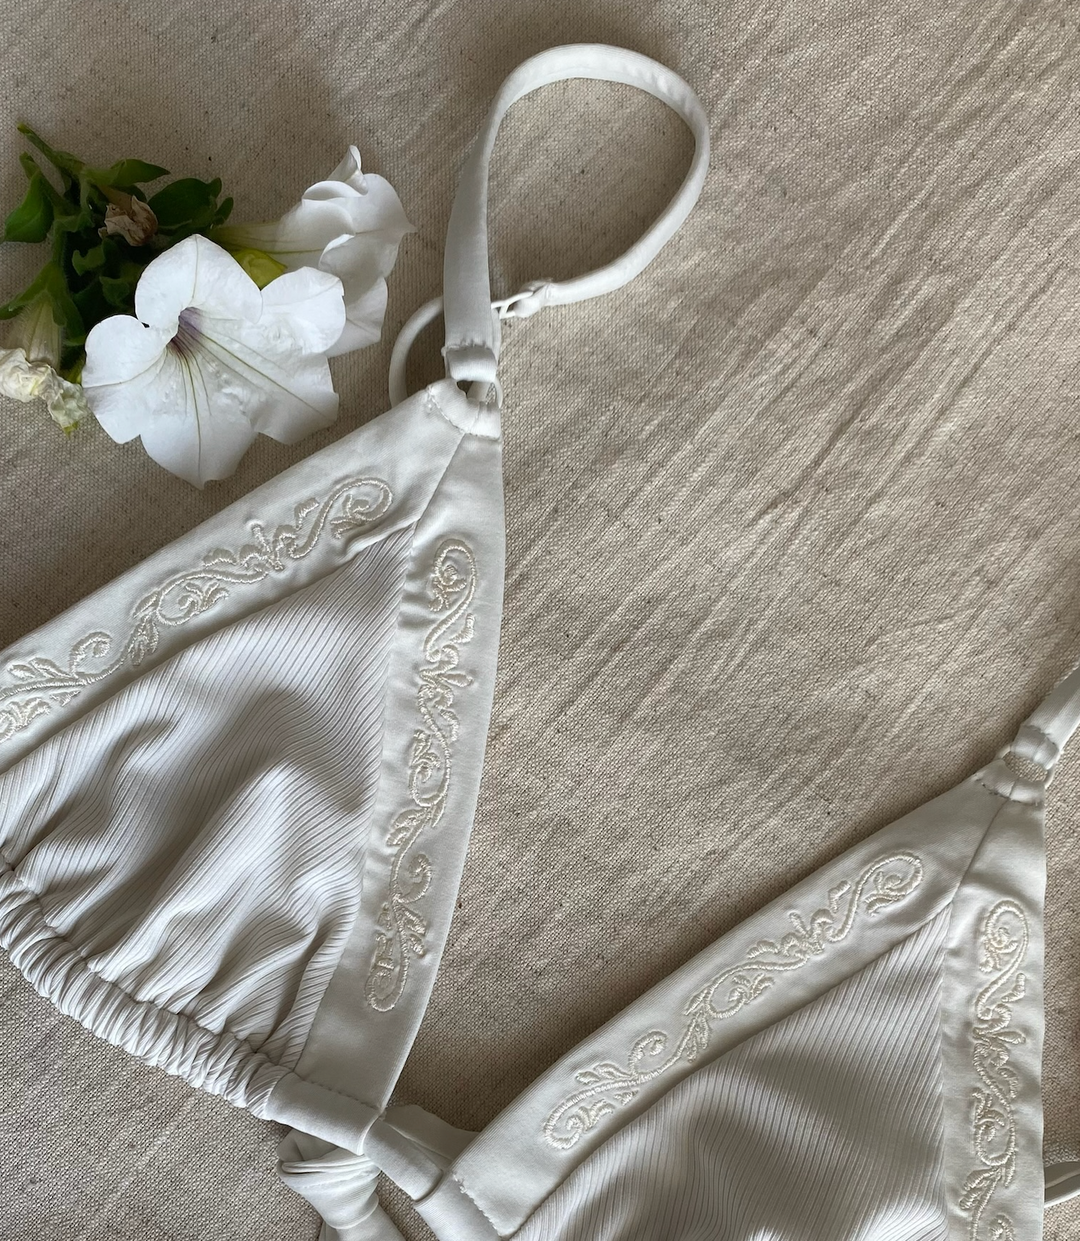 Close up of the rib fabric and embroidery details on the cup of the triangle bikini top in ivory white